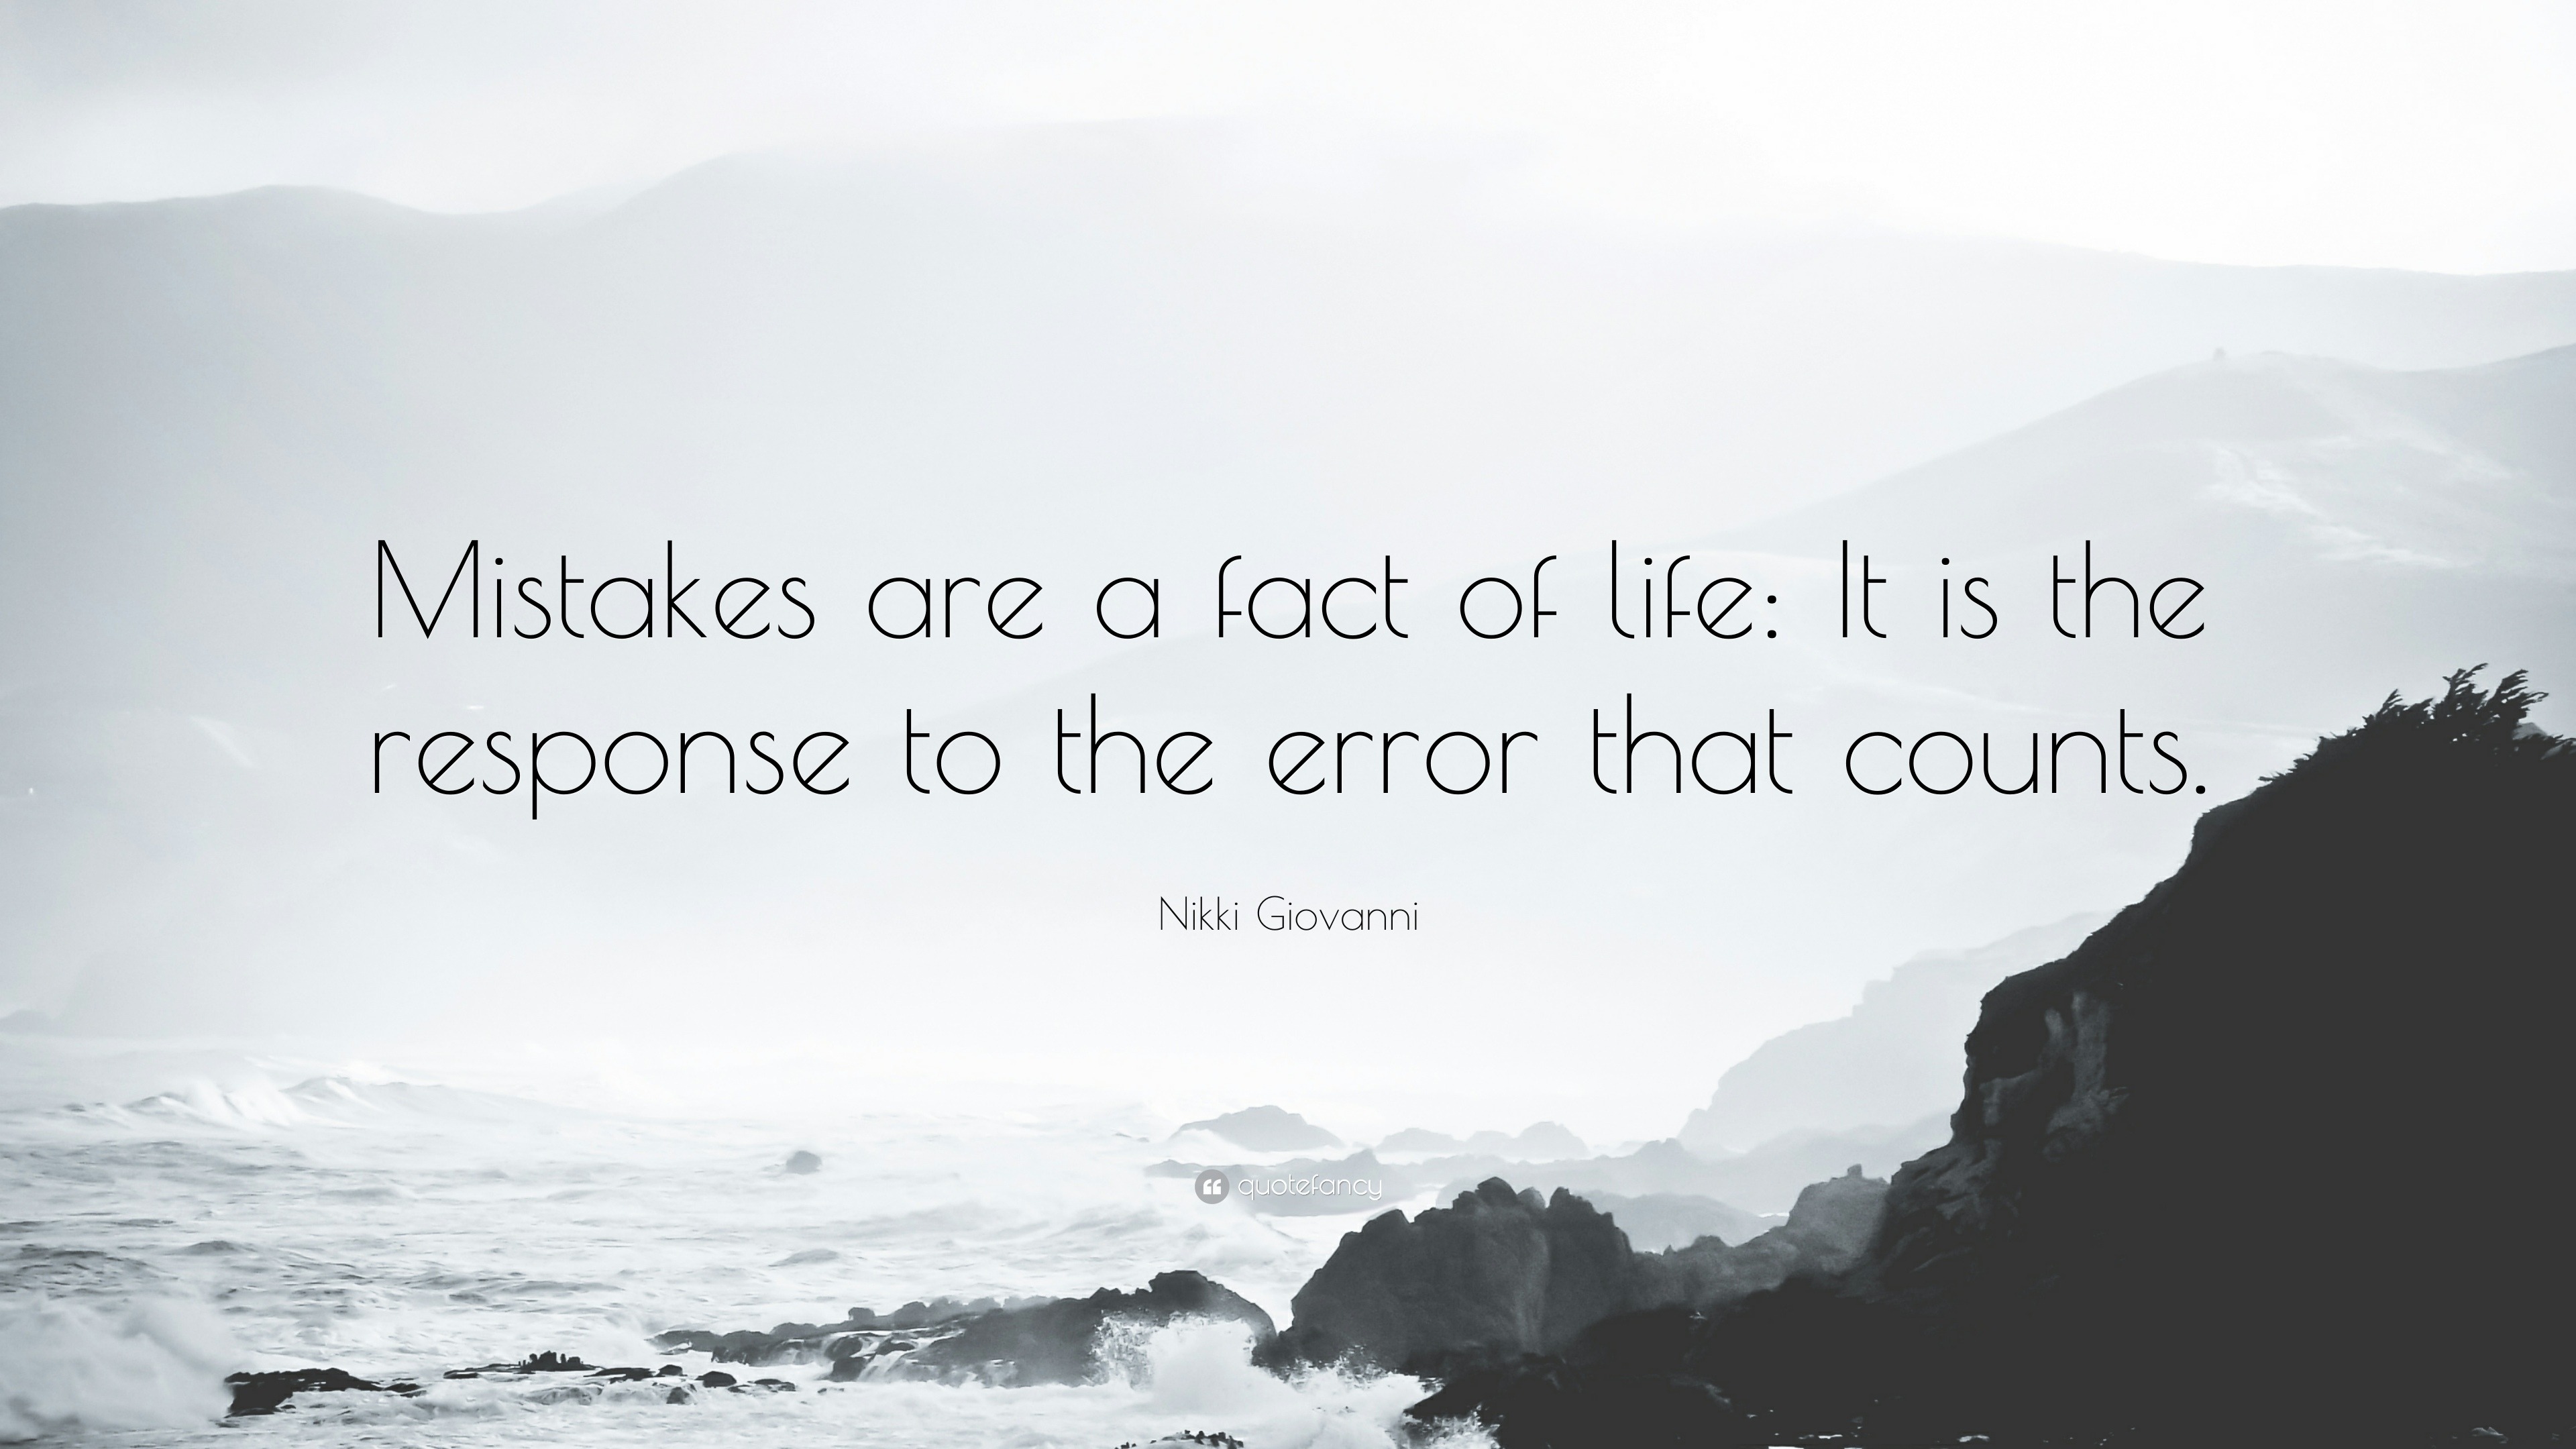 Nikki Giovanni Quote: “Mistakes are a fact of life: It is the response to  the error